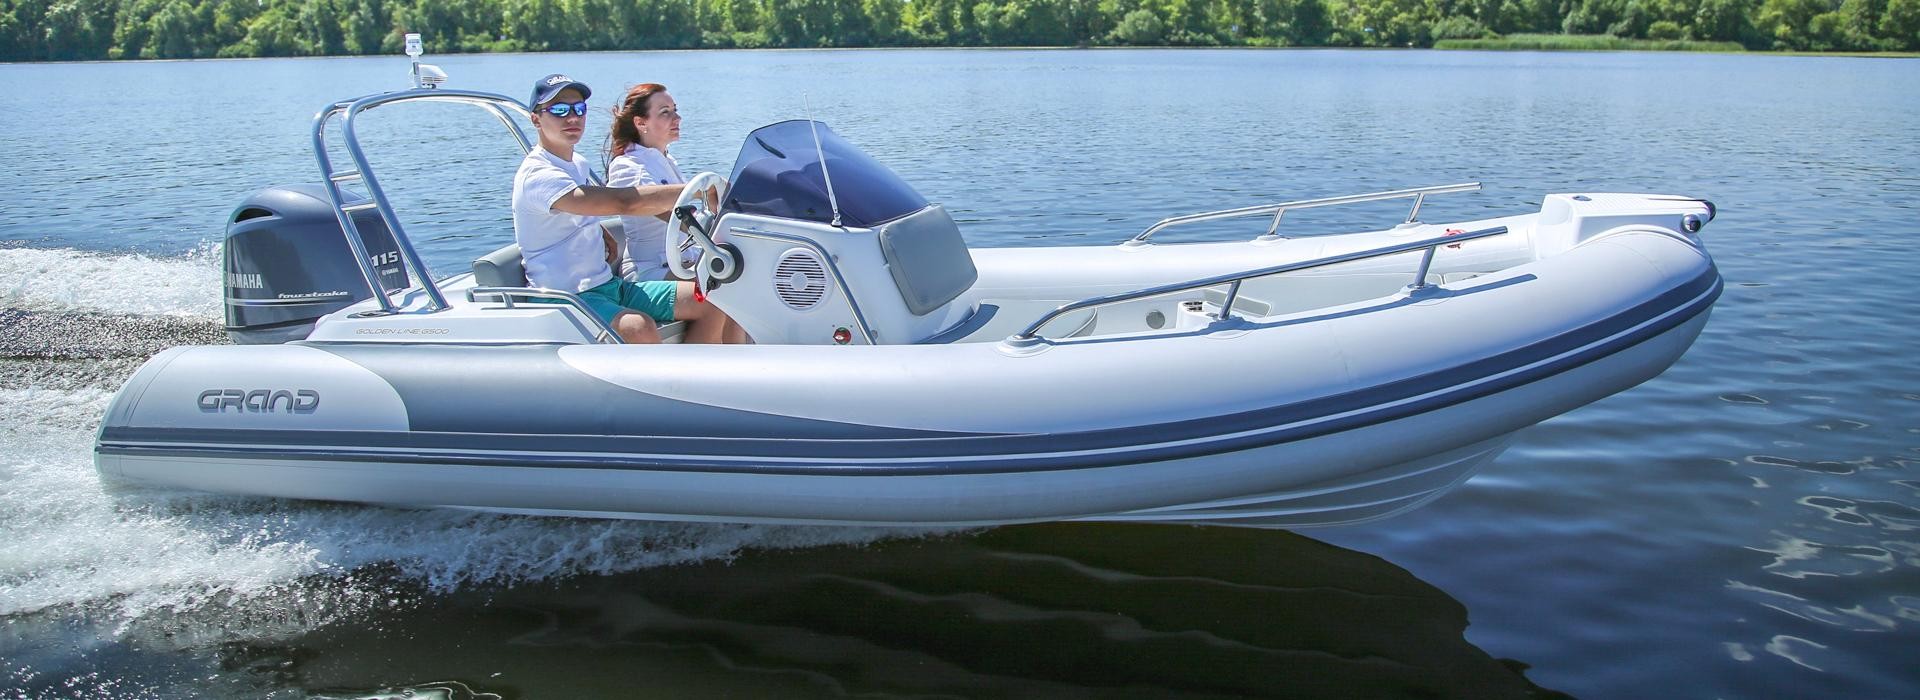 New Power Rigid Inflatable Boats (RIBs) for Sale 2022 Rib G500HLF 